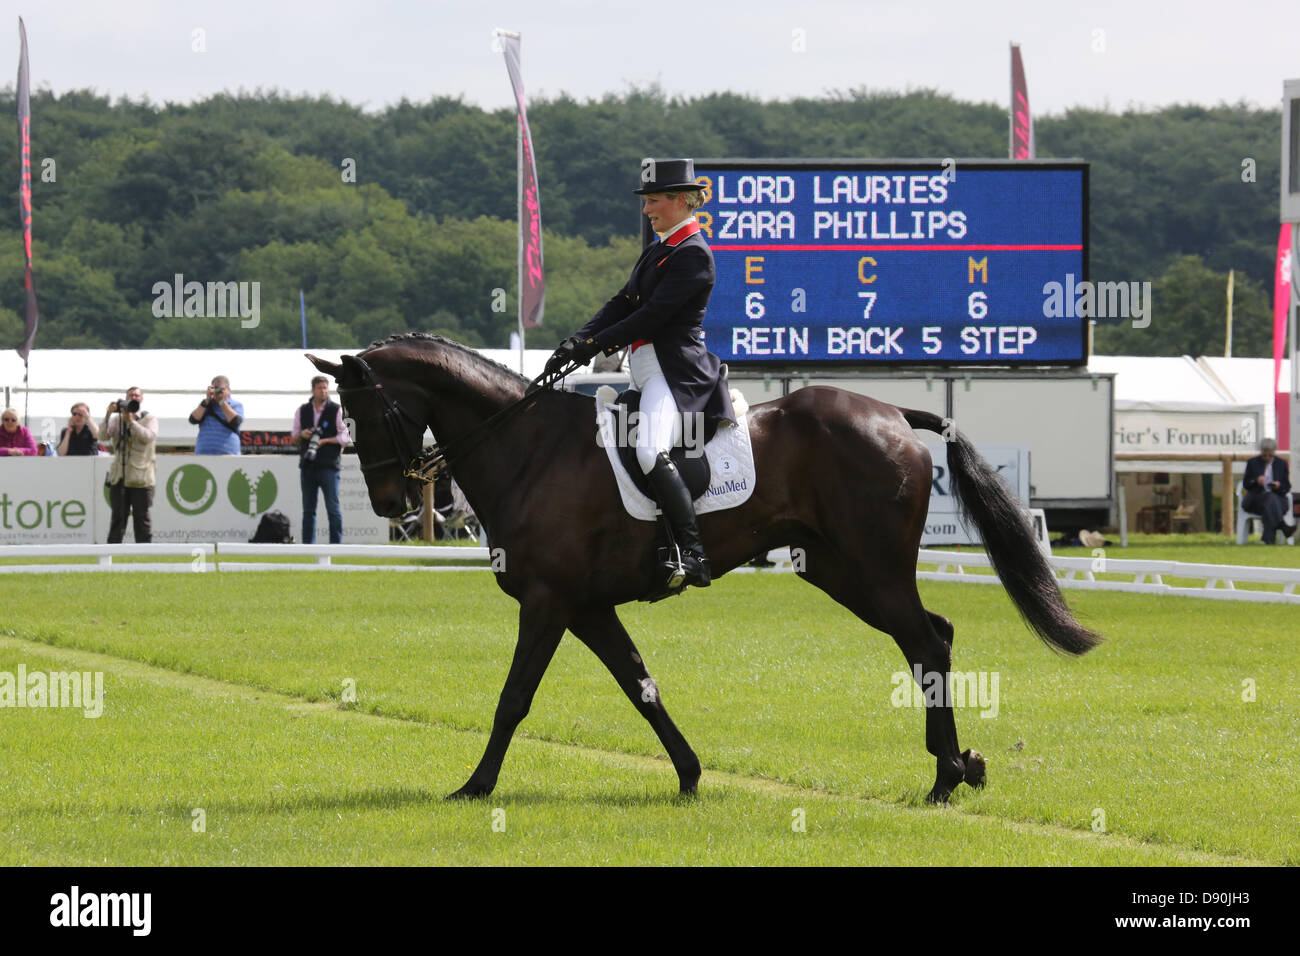 Leeds Yorkshire UK, 6th June 2013. Zara Philips the second-eldest grandchild of Queen Elizabeth II, on the opening day of the dressage event riding Lord Lauries at the 40th Bramham Horse Trials. Credit  S D Schofield/Alamy Live News Stock Photo